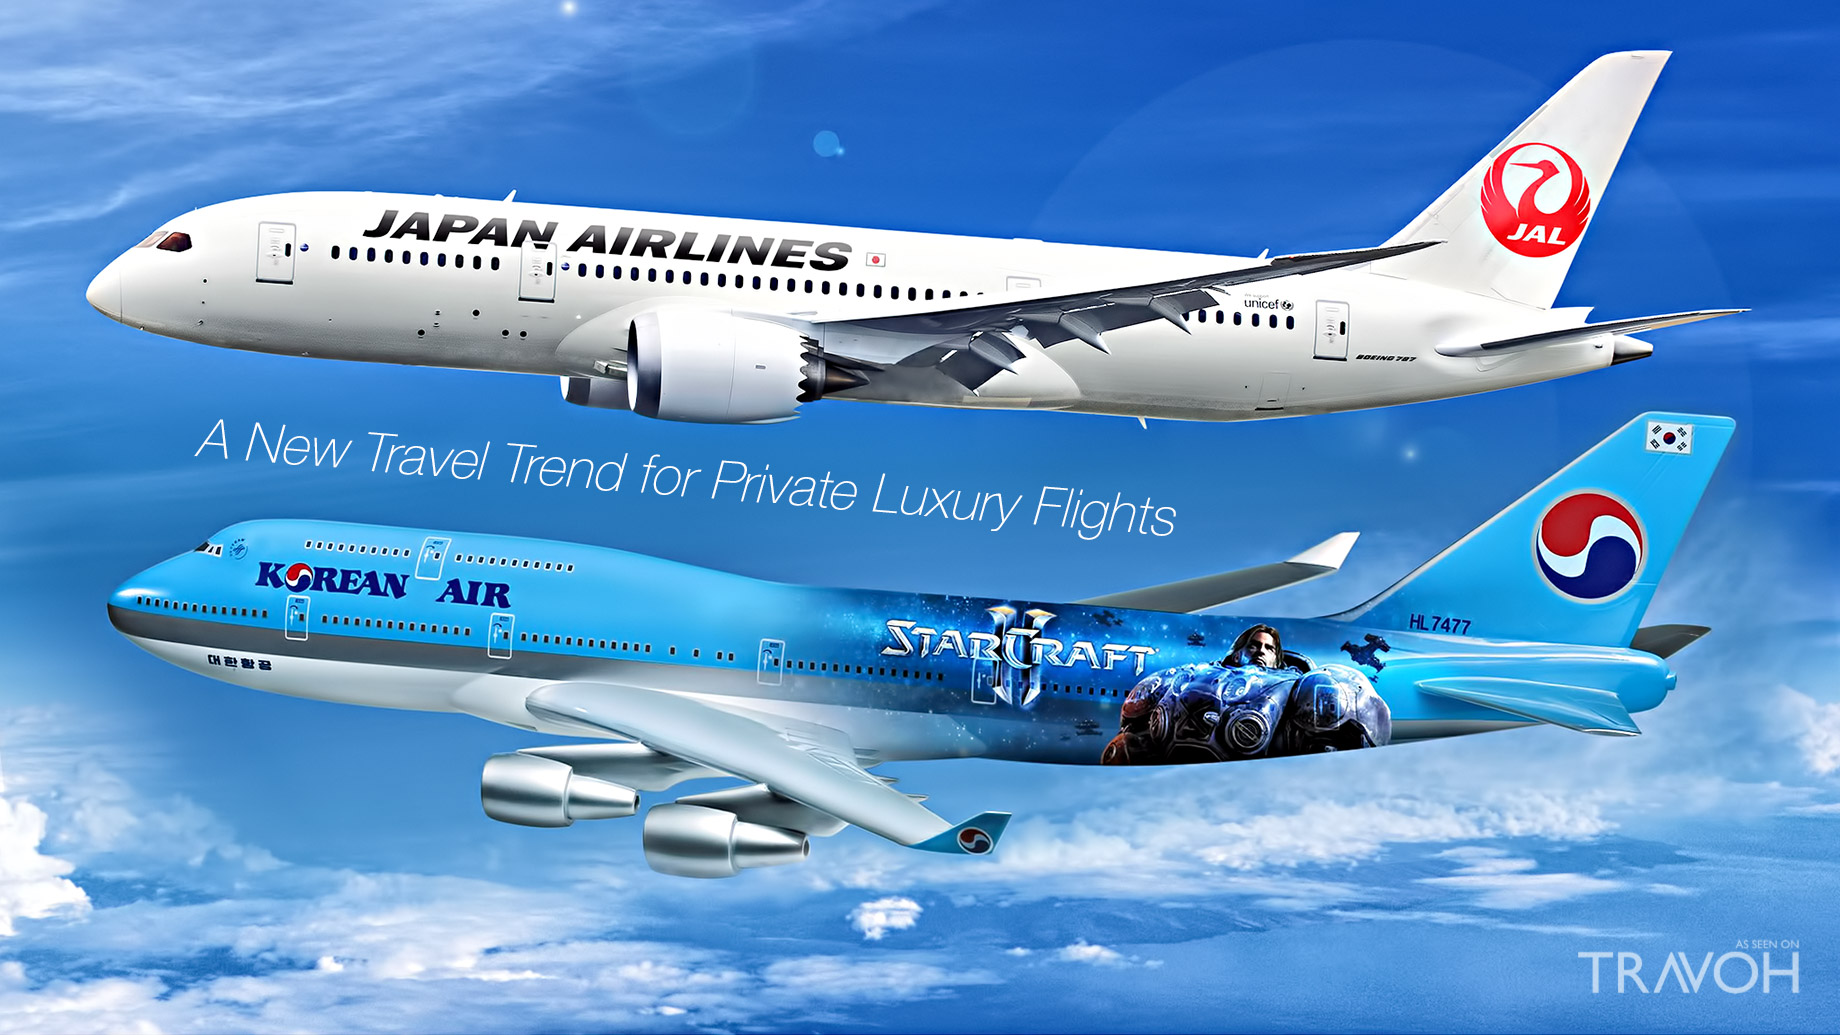 Japan Airlines and Korean Air – A New Travel Trend for Private Luxury Flights